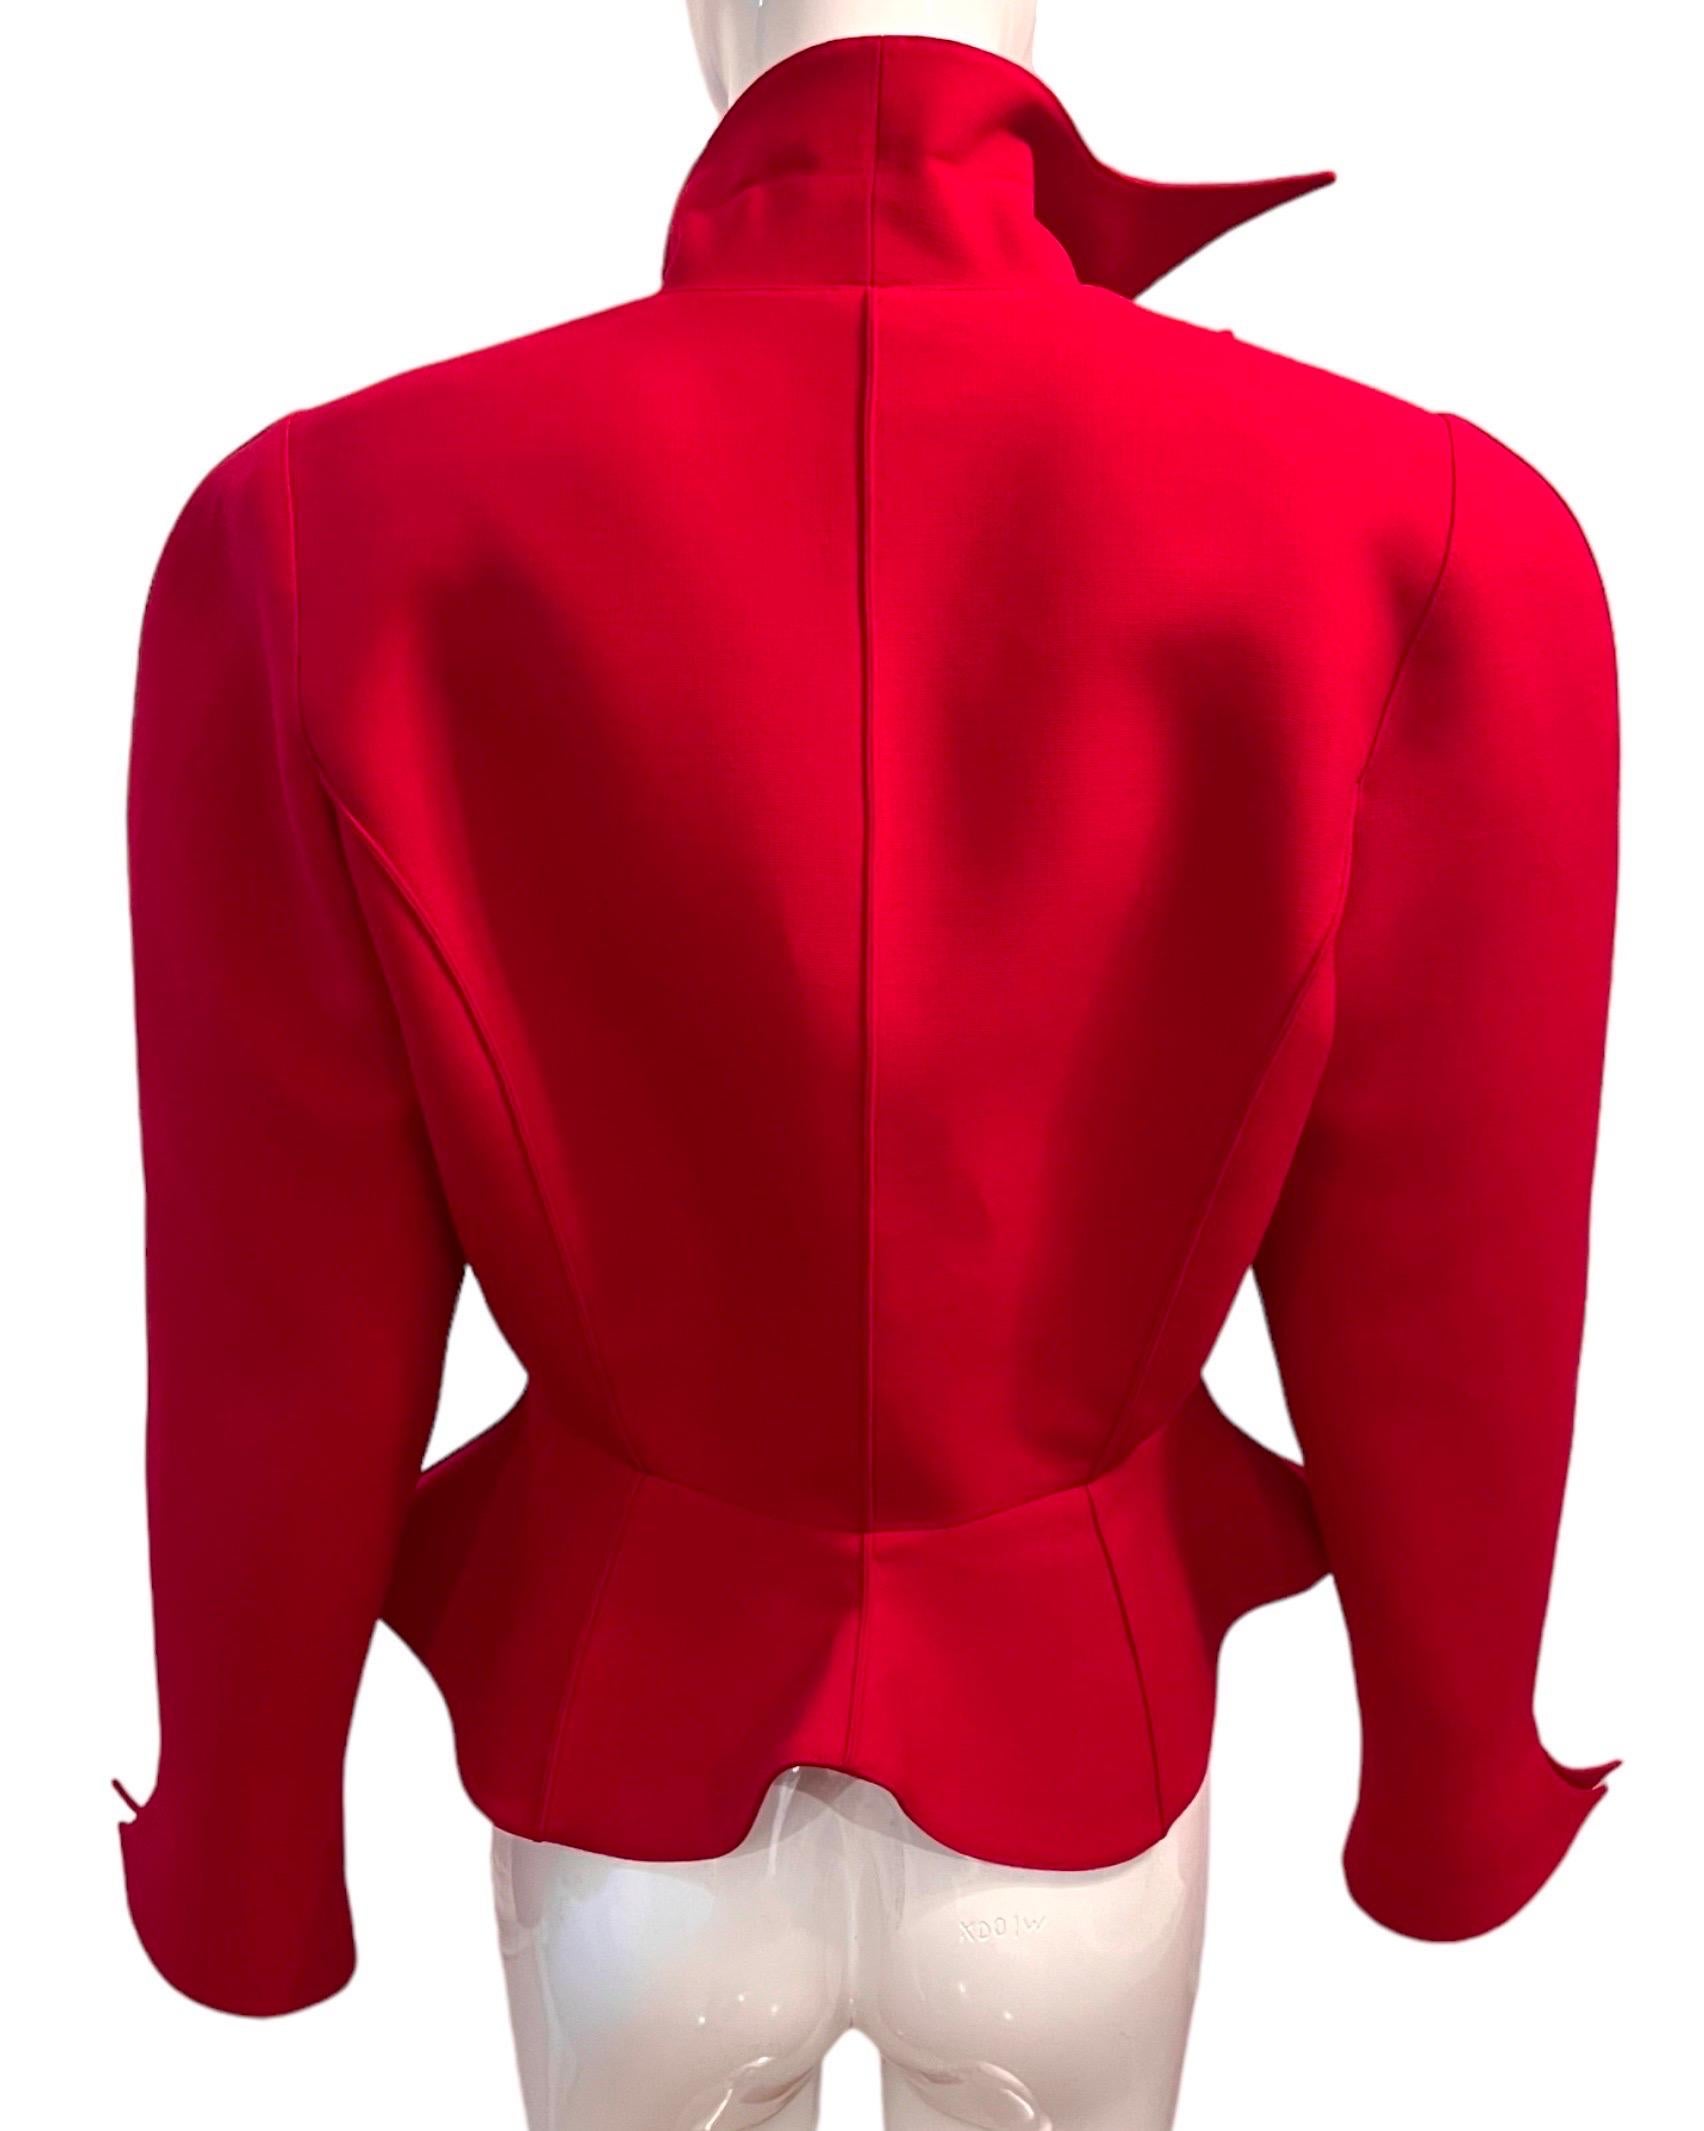 F/W 1988 Thierry Mugler Flaming Red Les Infernales Jagged Sculptural Jacket 9